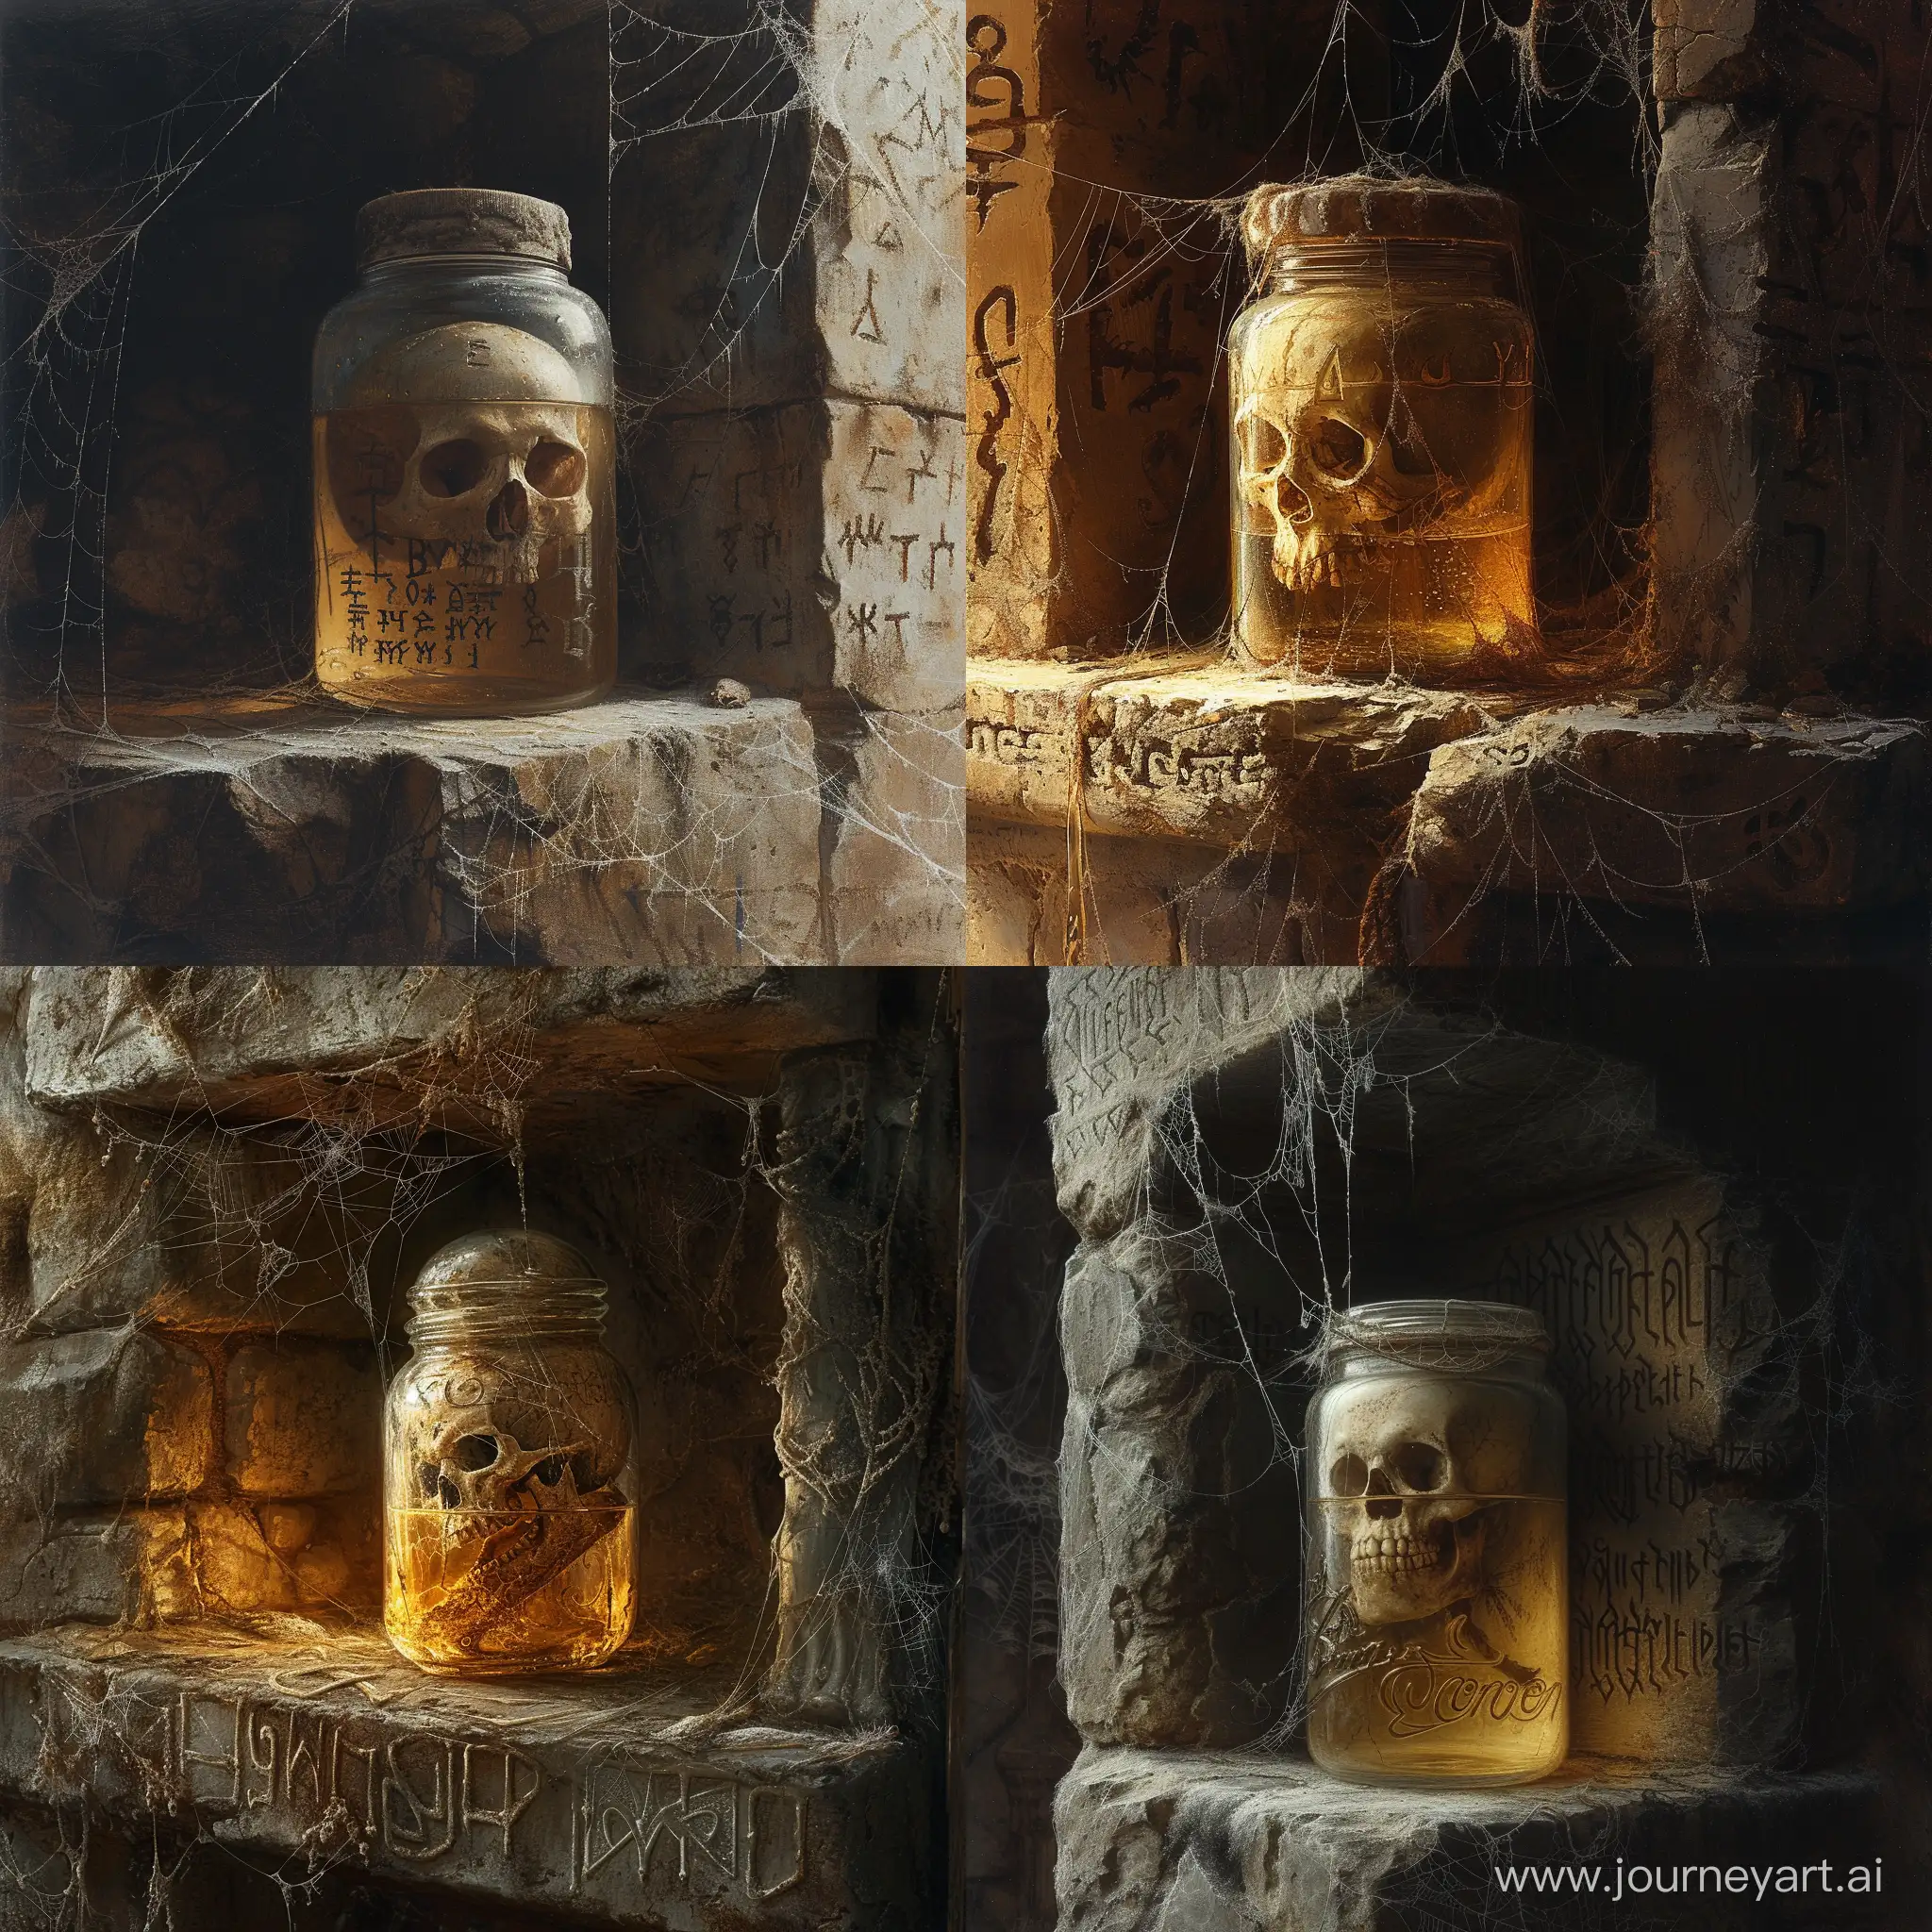 Beksinskis-Grotesque-Skull-in-Alcohol-Dark-and-Haunting-Art-on-Ancient-Stone-Shelf